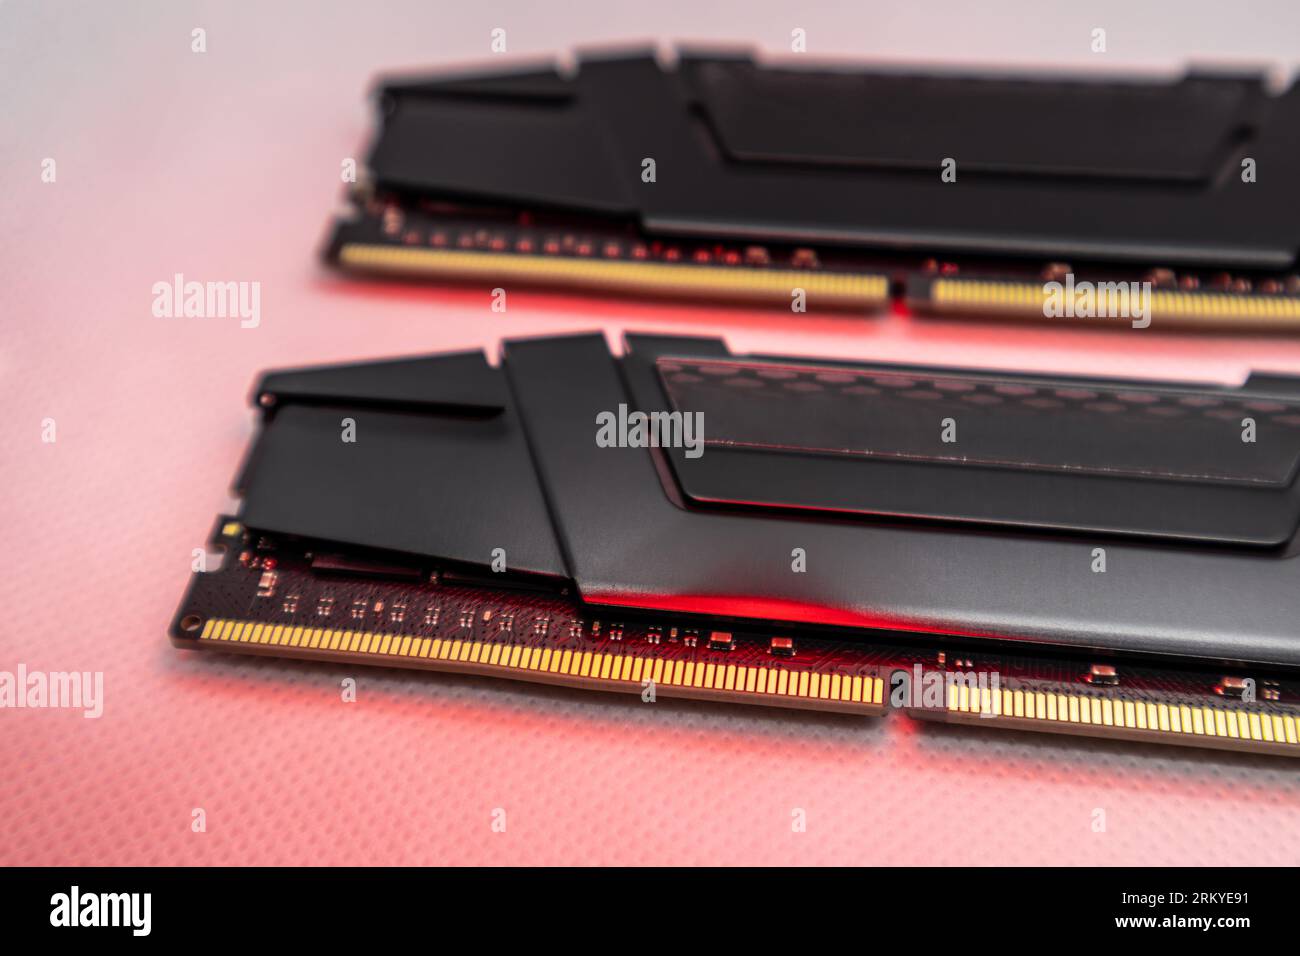 DDR4 DRAM memory modules in red light. Computer RAM chip close-up on white. Desktop PC memory parts for assemble Stock Photo